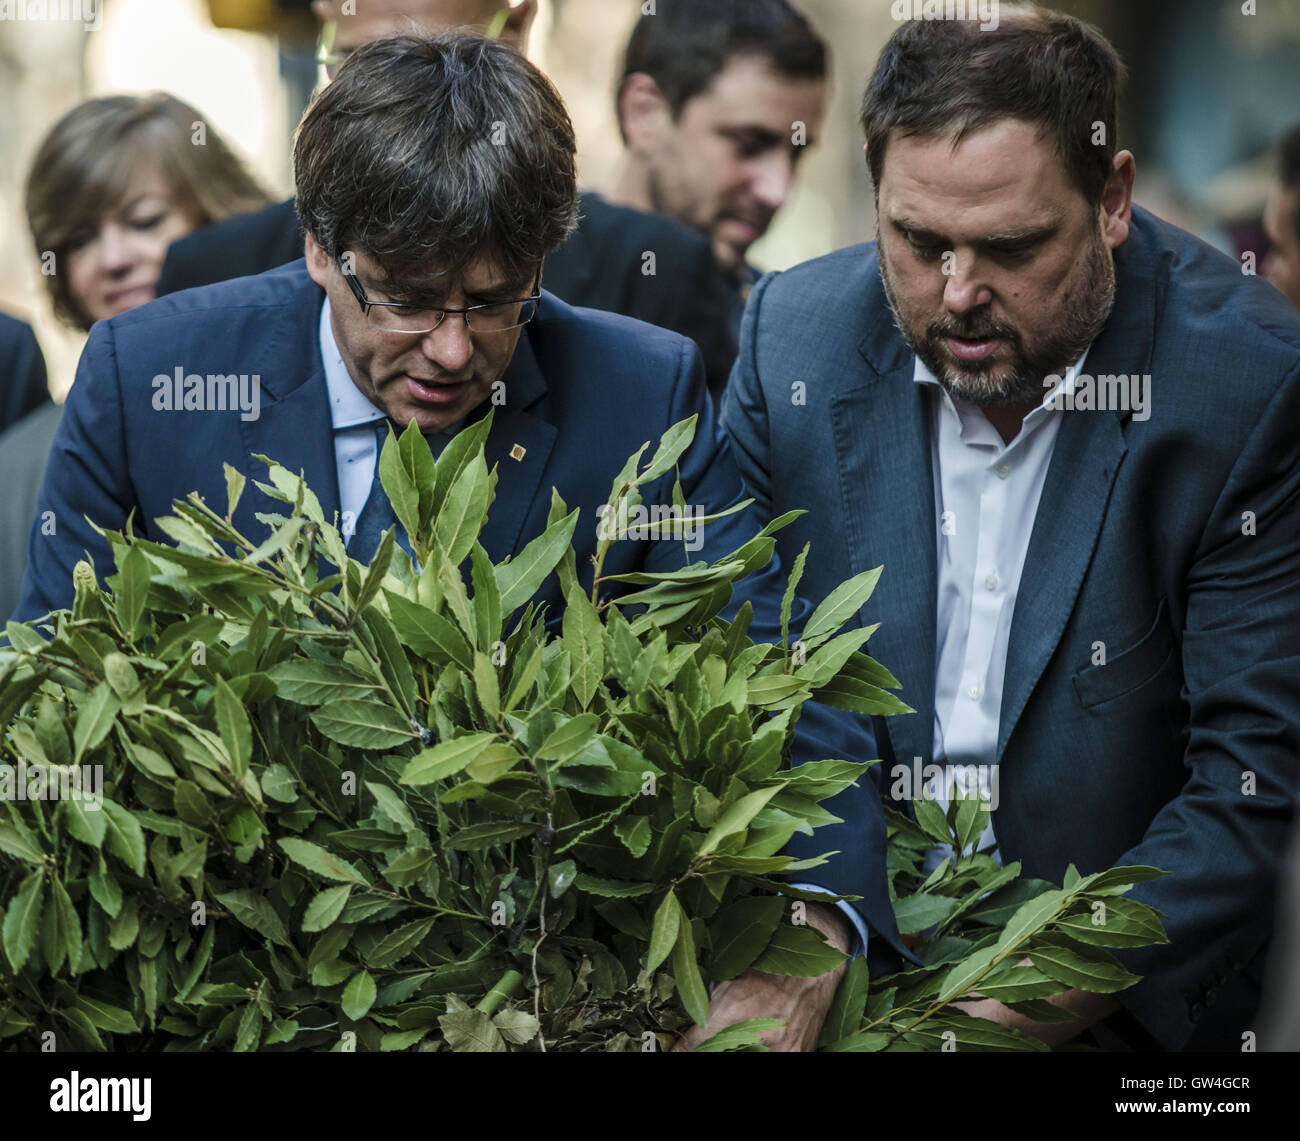 Barcelona, Catalonia, Spain. 11th September, 2016. President of the Catalan government CARLES PUIGDEMONT and minister ORIOL JUNQUERAS deposit a wreath at the foot of the Rafael Casanova monument on the 'Diada' (Catalan National Day) in Barcelona Credit:  ZUMA Press, Inc./Alamy Live News Stock Photo